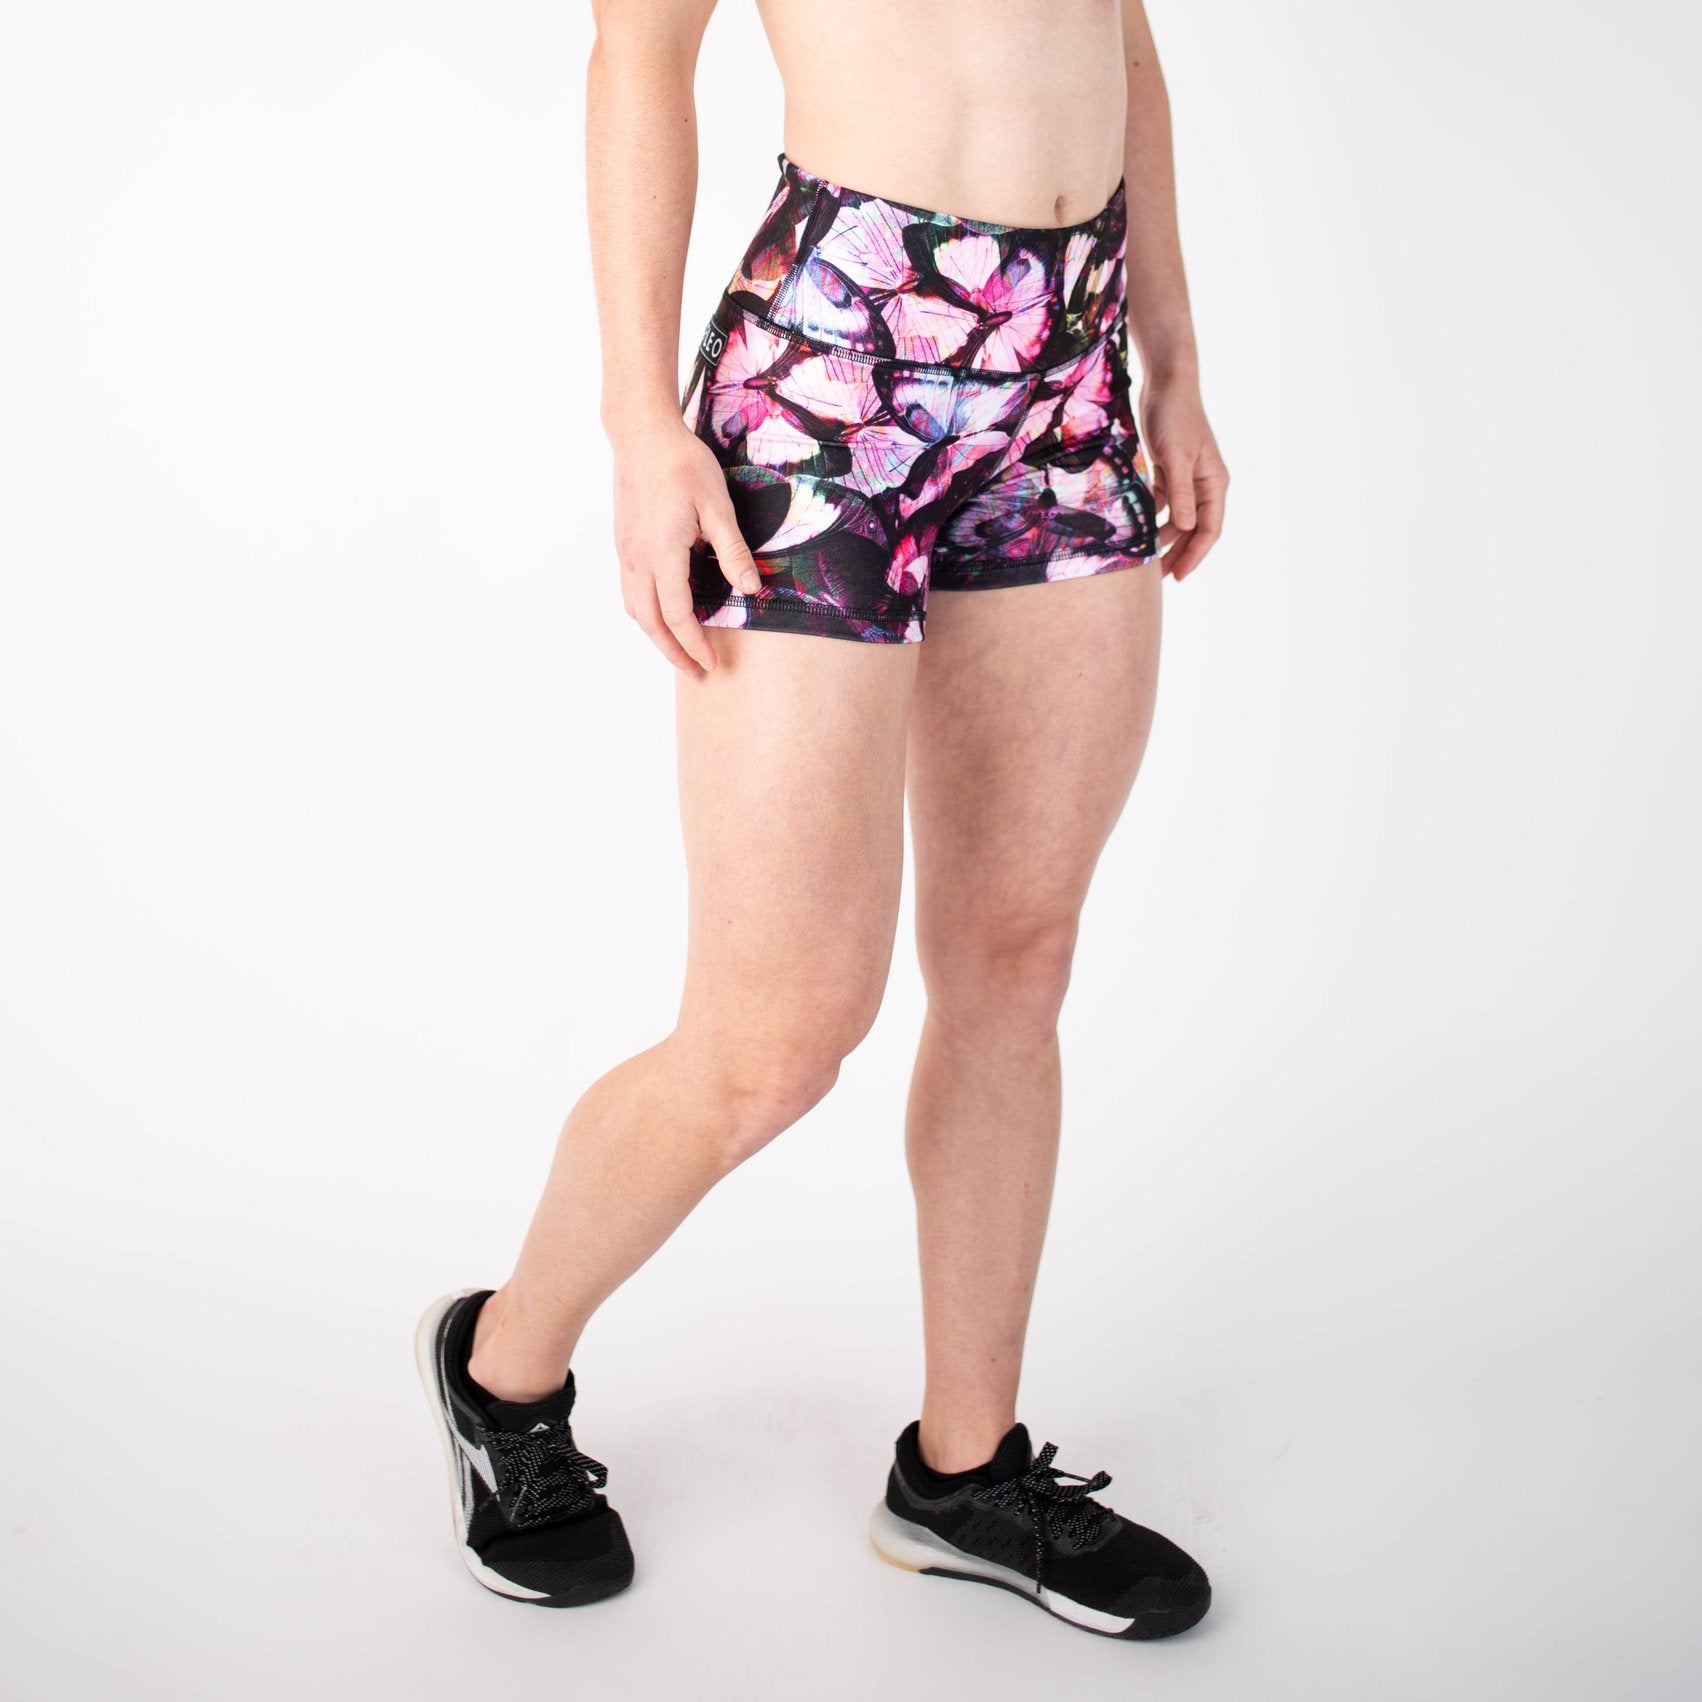 FLEO Butterfly Daydream Shorts (Power High-rise) - 9 for 9